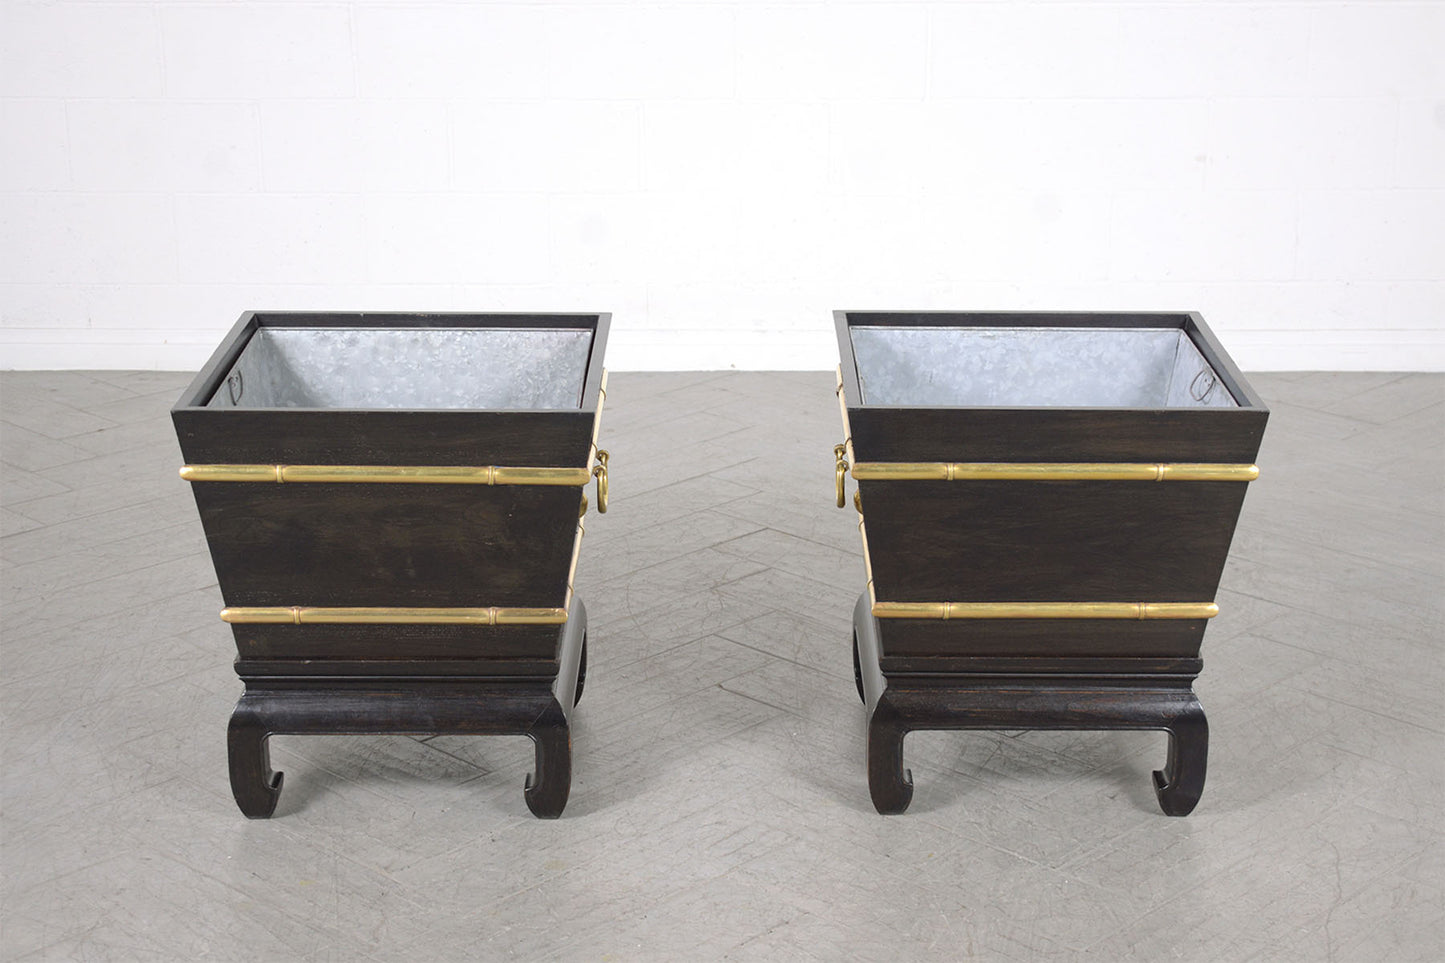 Restored Early 1900s Chinese Wood and Brass Garden Planters